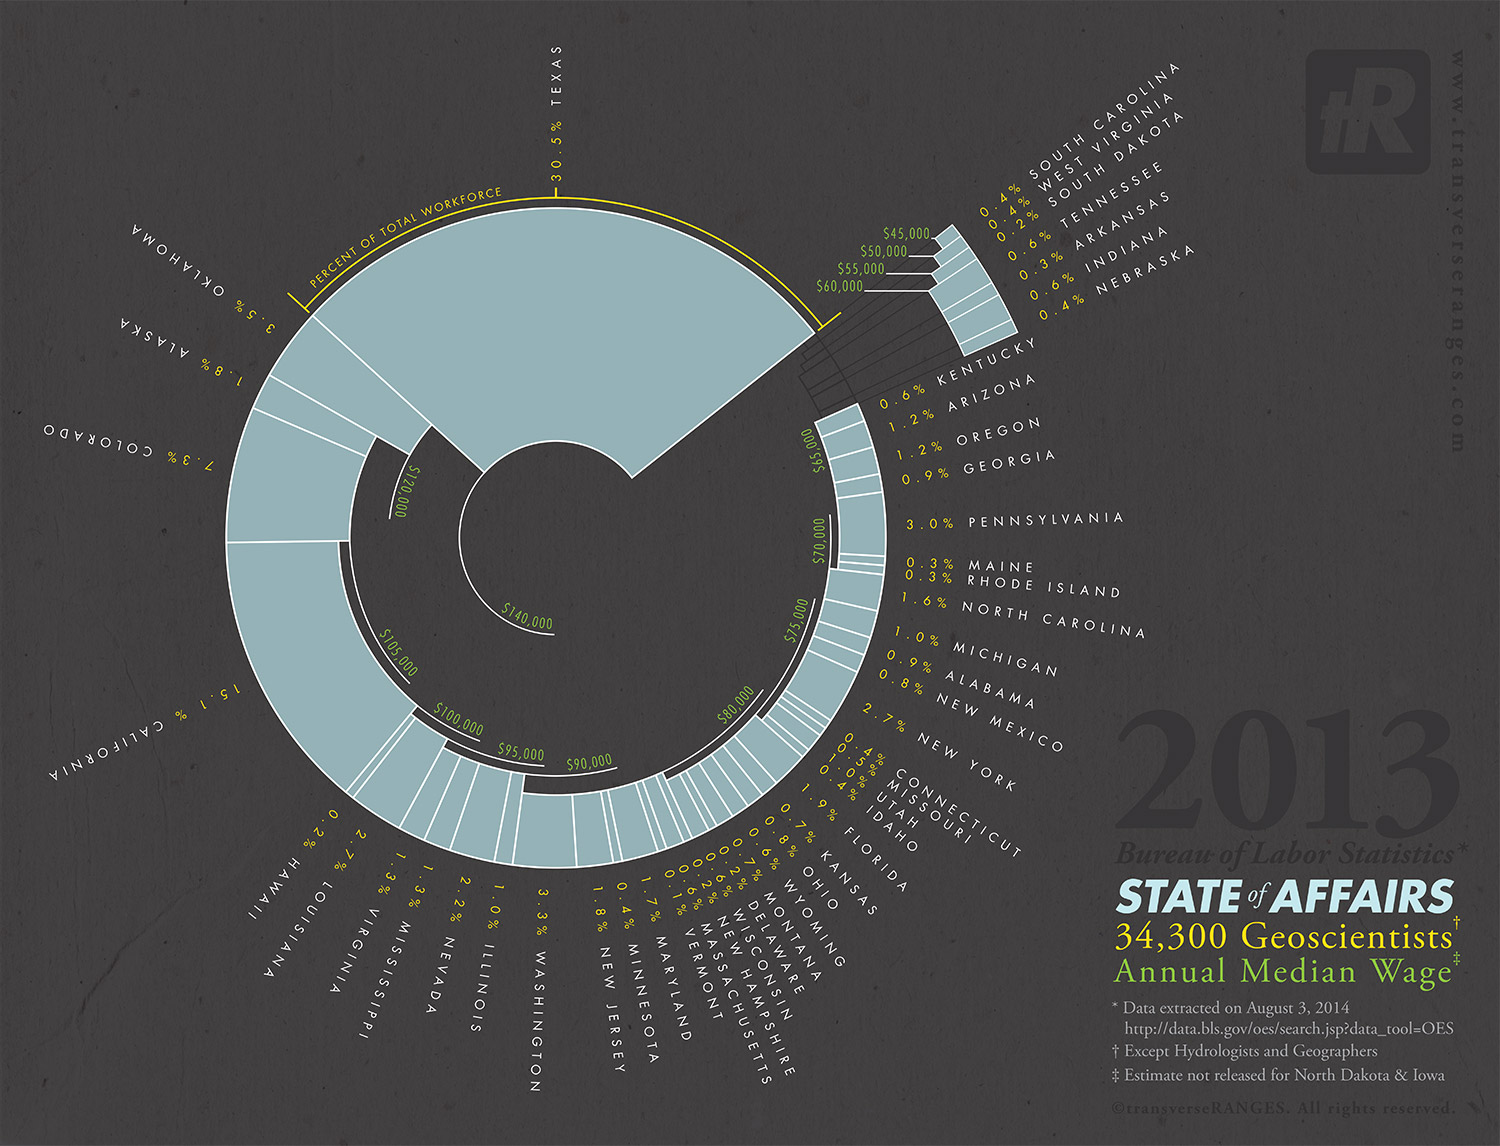 Datavisualization that combines percentage of geoscientist in the workforce and median income by state for 2013.